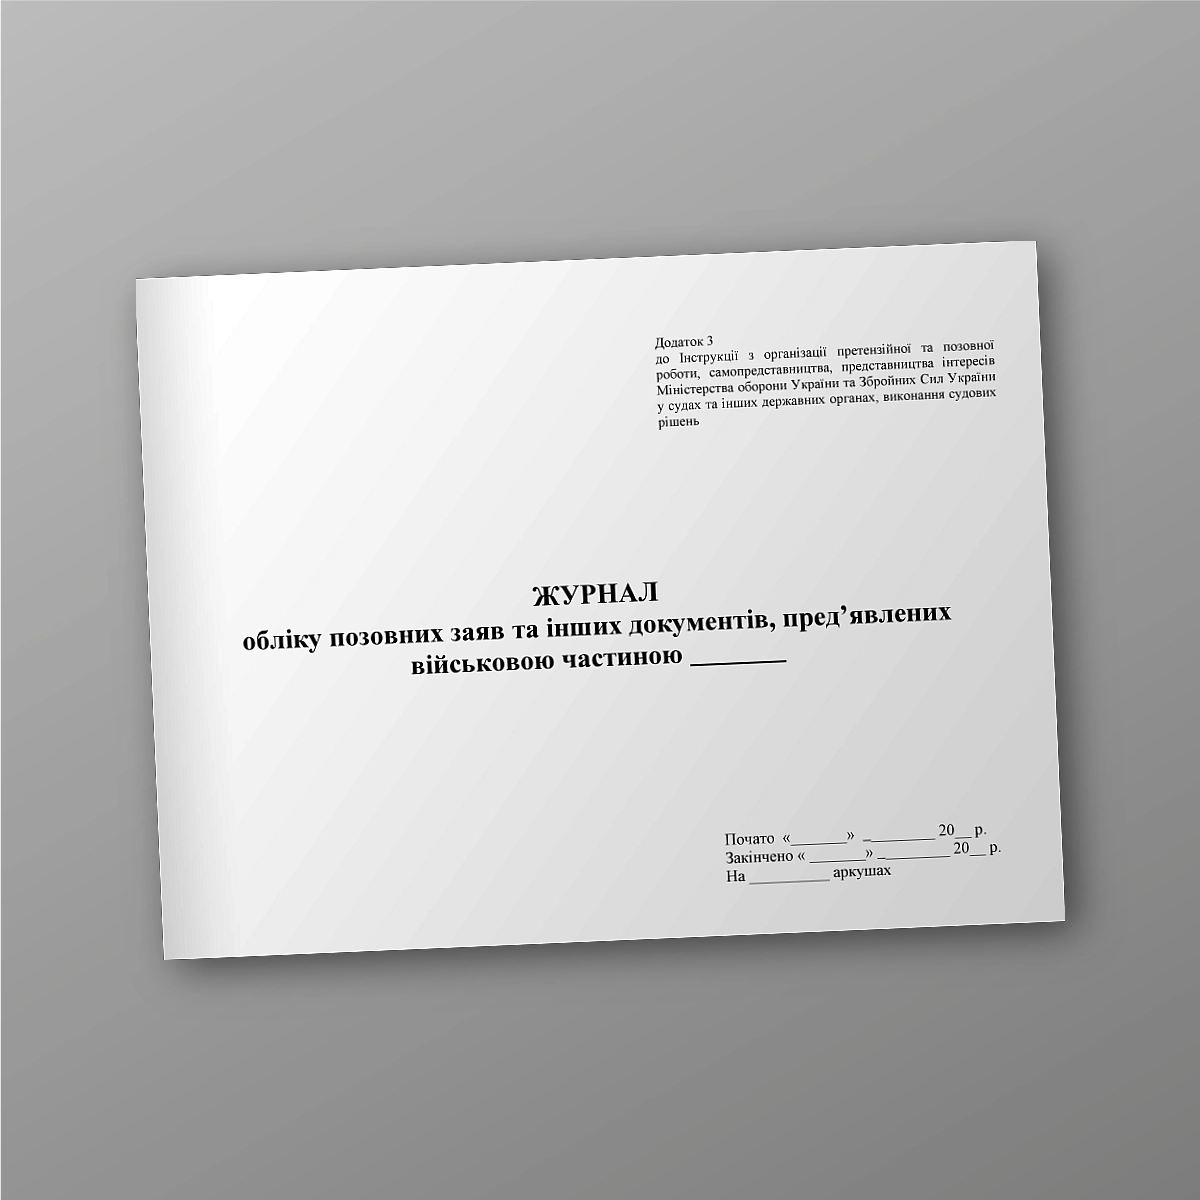 Journal of accounting of claims and other documents submitted to military base | PrintTo: